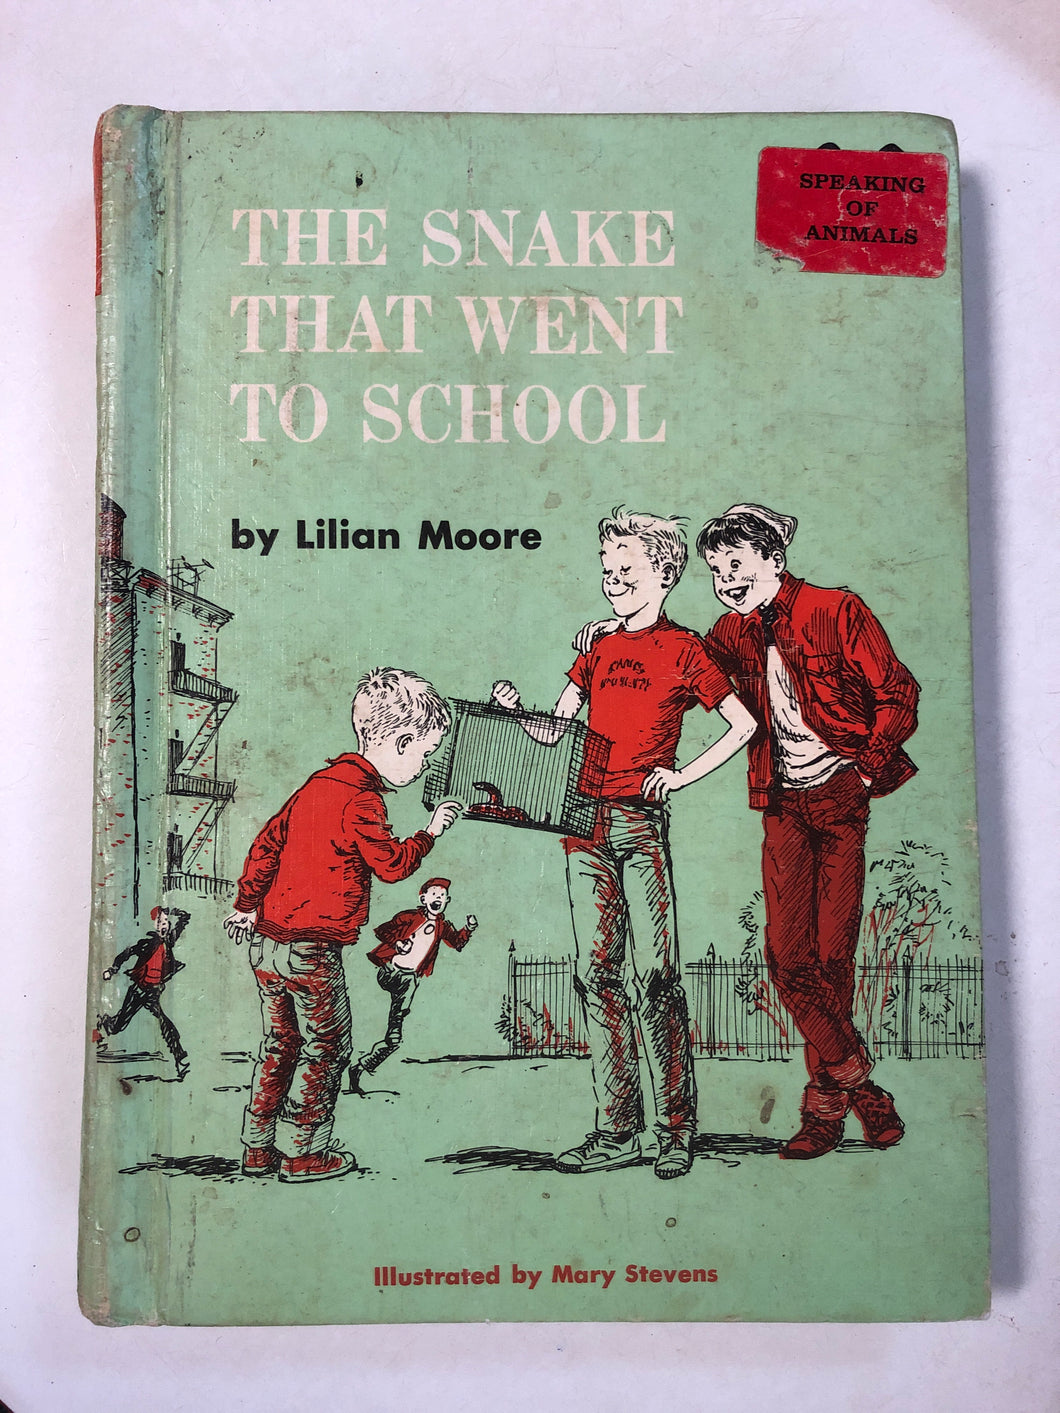 The Snake That Went To School - Slick Cat Books 